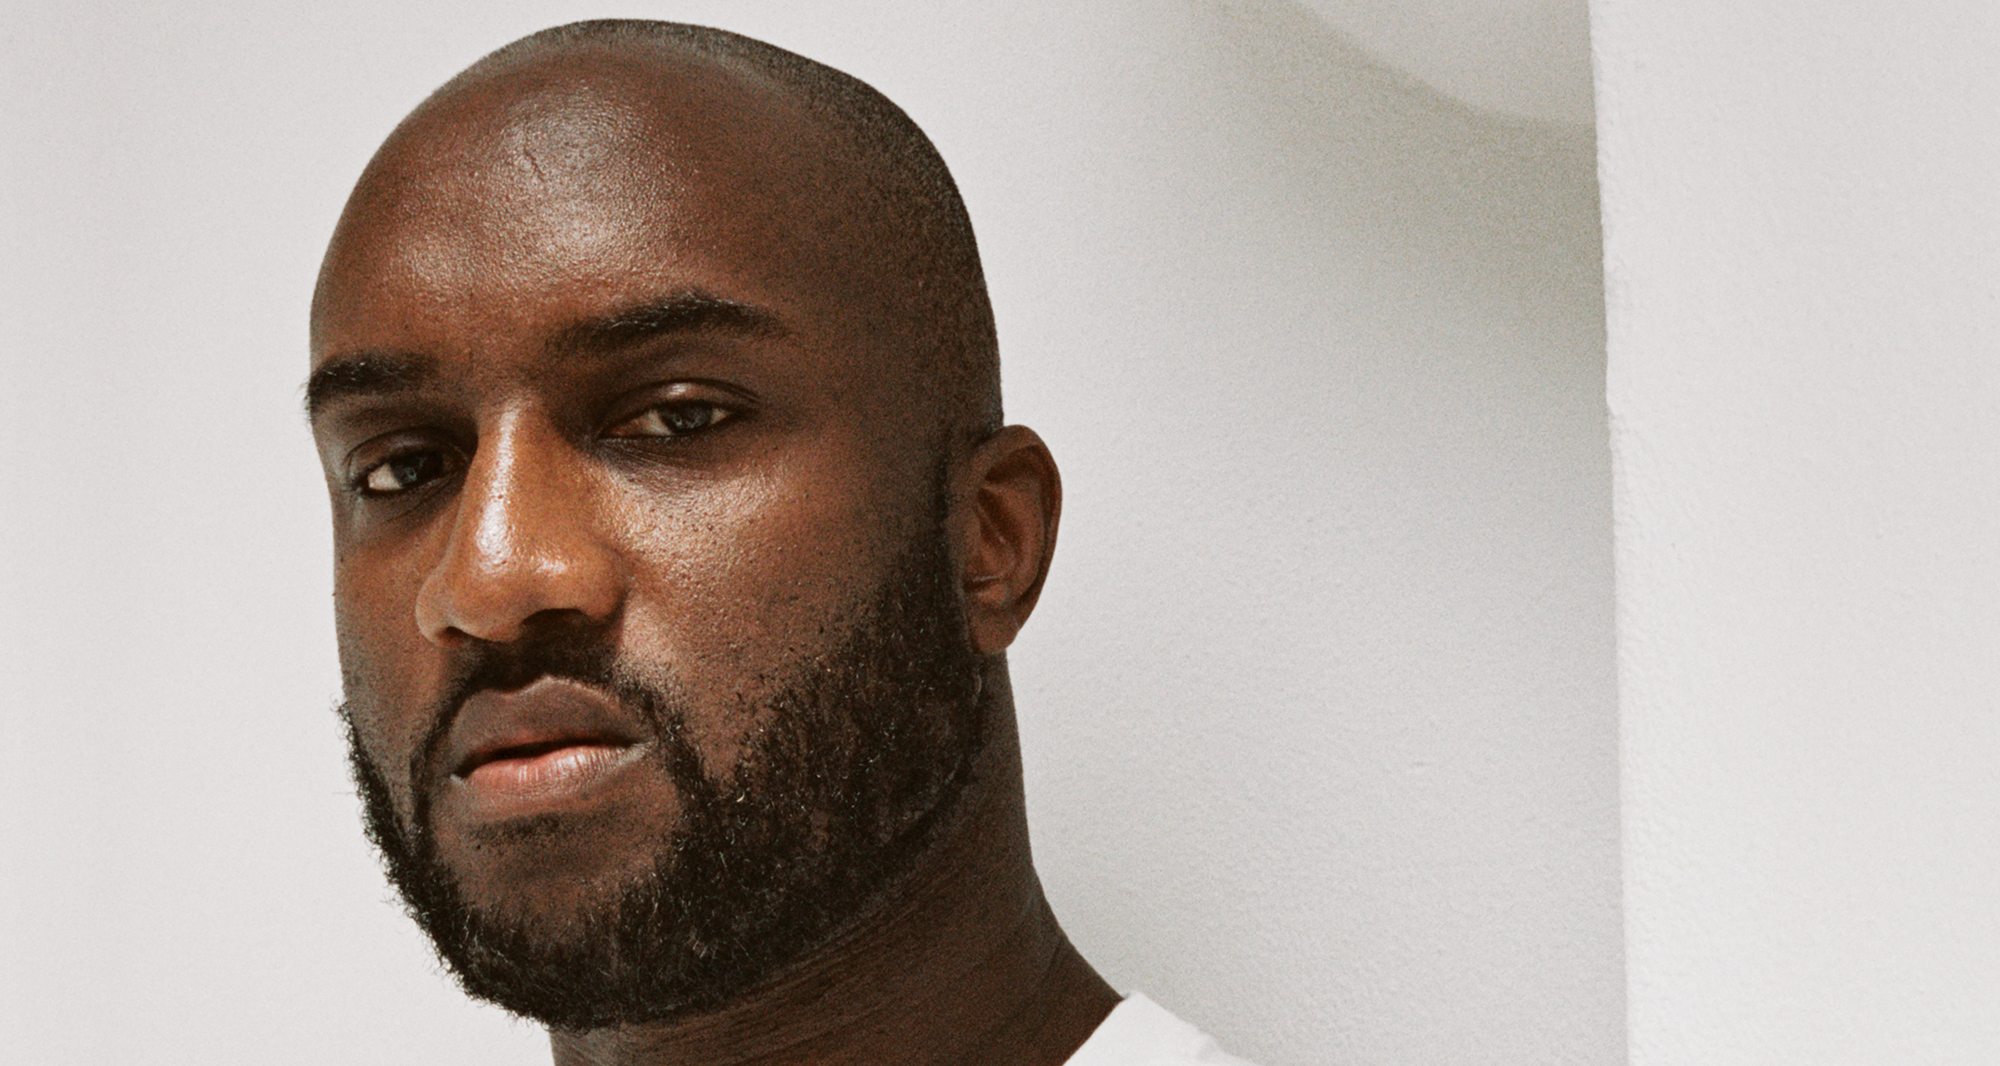 Virgil Abloh x Nike OFF CAMPUS NYC Events List